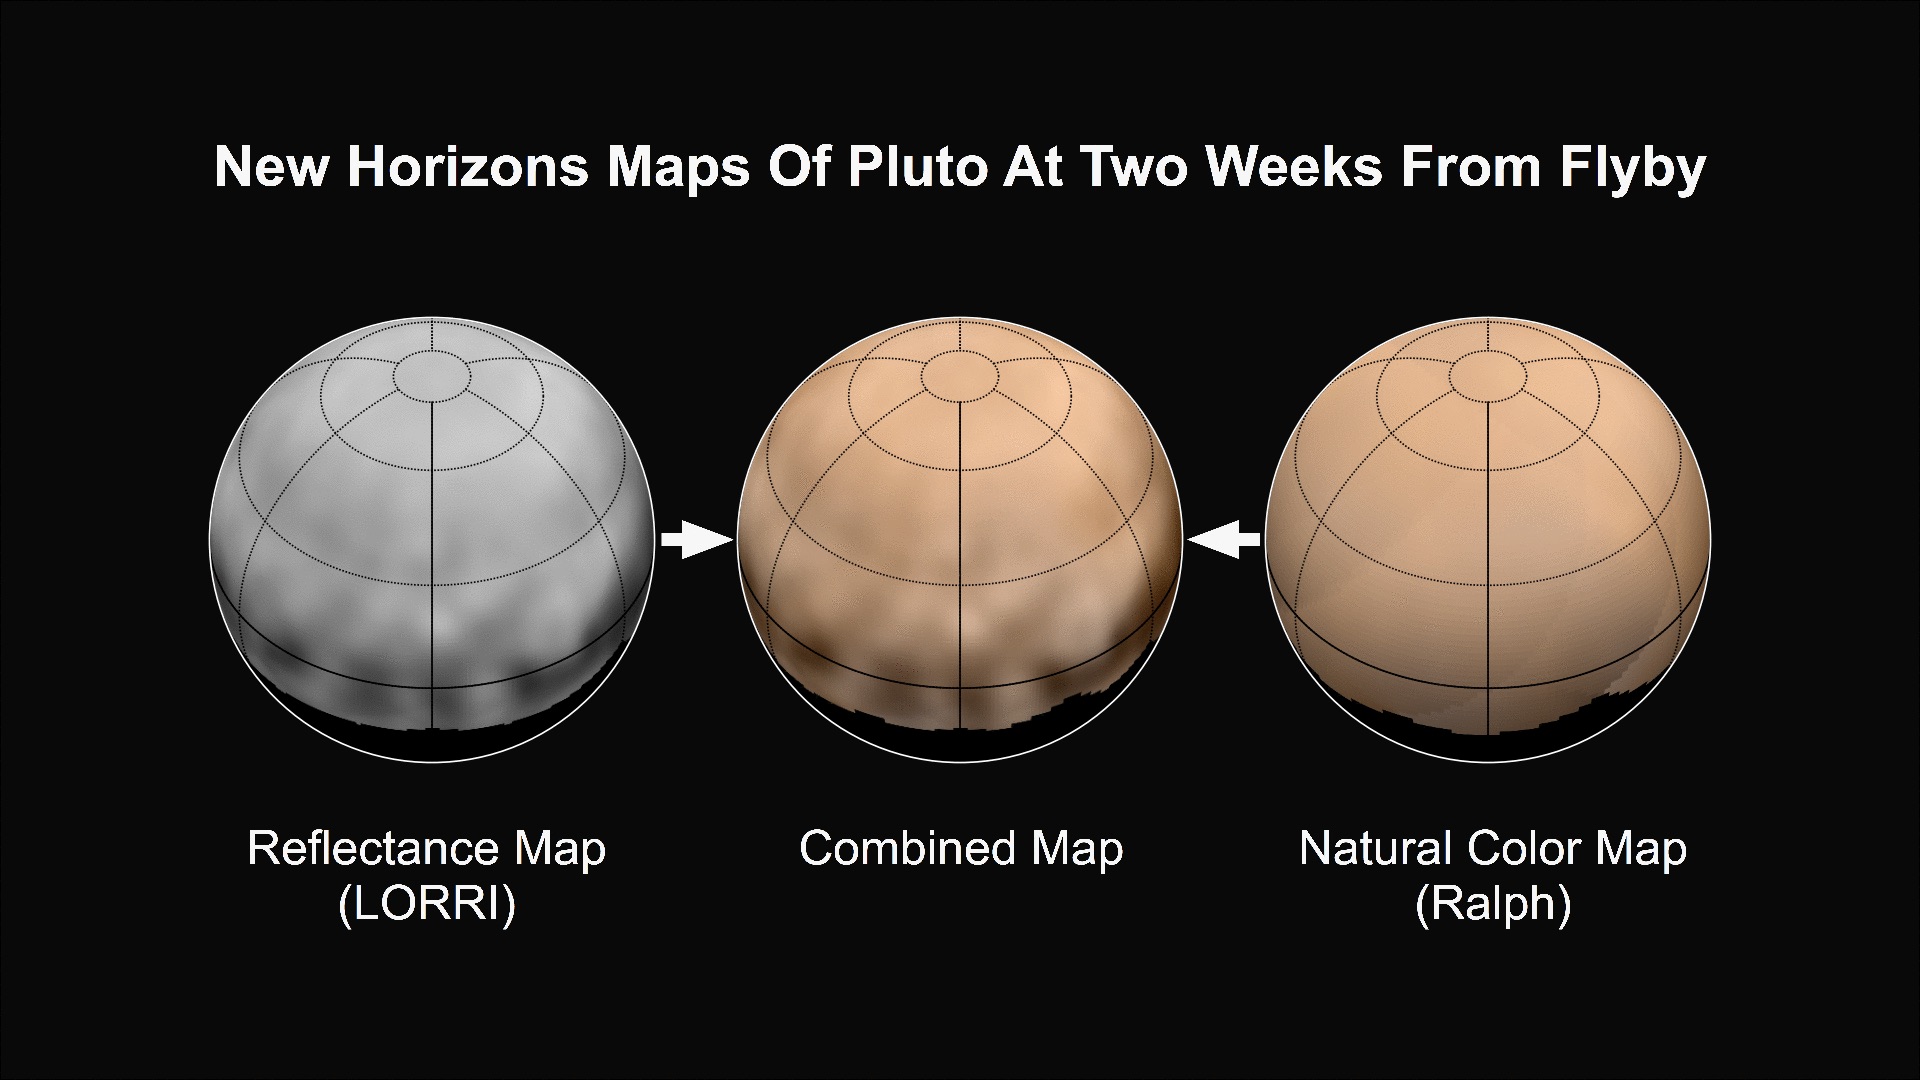 New Horizons scientists combined the latest black and white map of Pluto’s surface features (left) with a map of the planet’s colors (right) to produce a detailed color portrait of the planet’s northern hemisphere (center). Credits: NASA/JHUAPL/SWRI